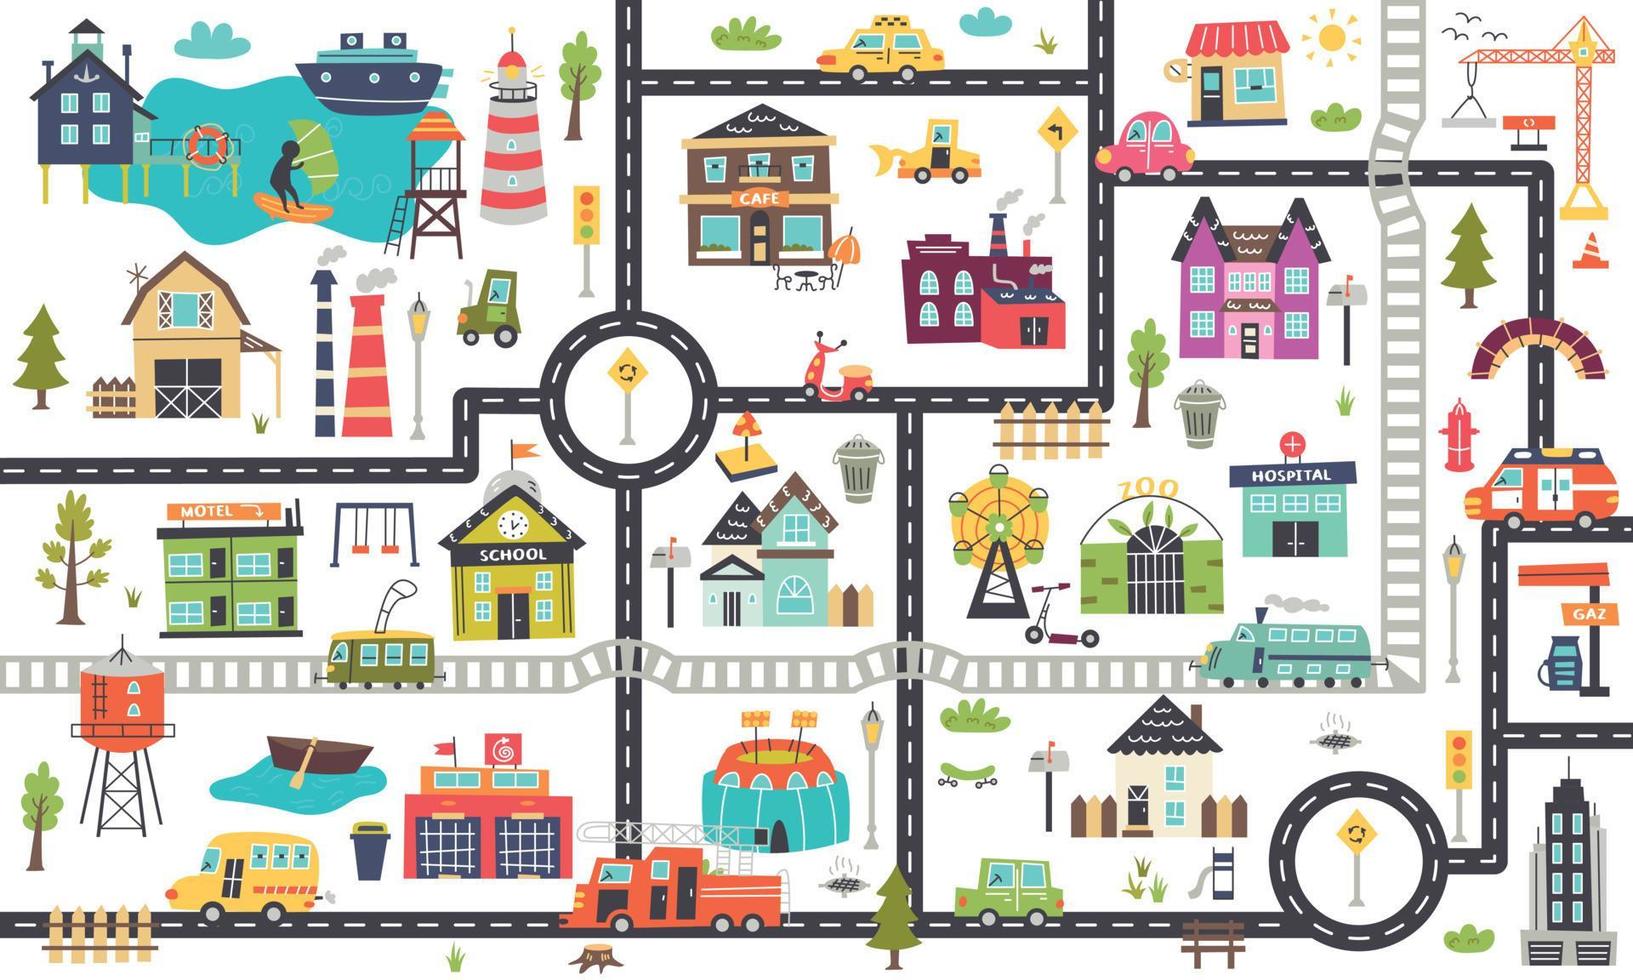 Horizontal children's map with roads, cars, buildings vector